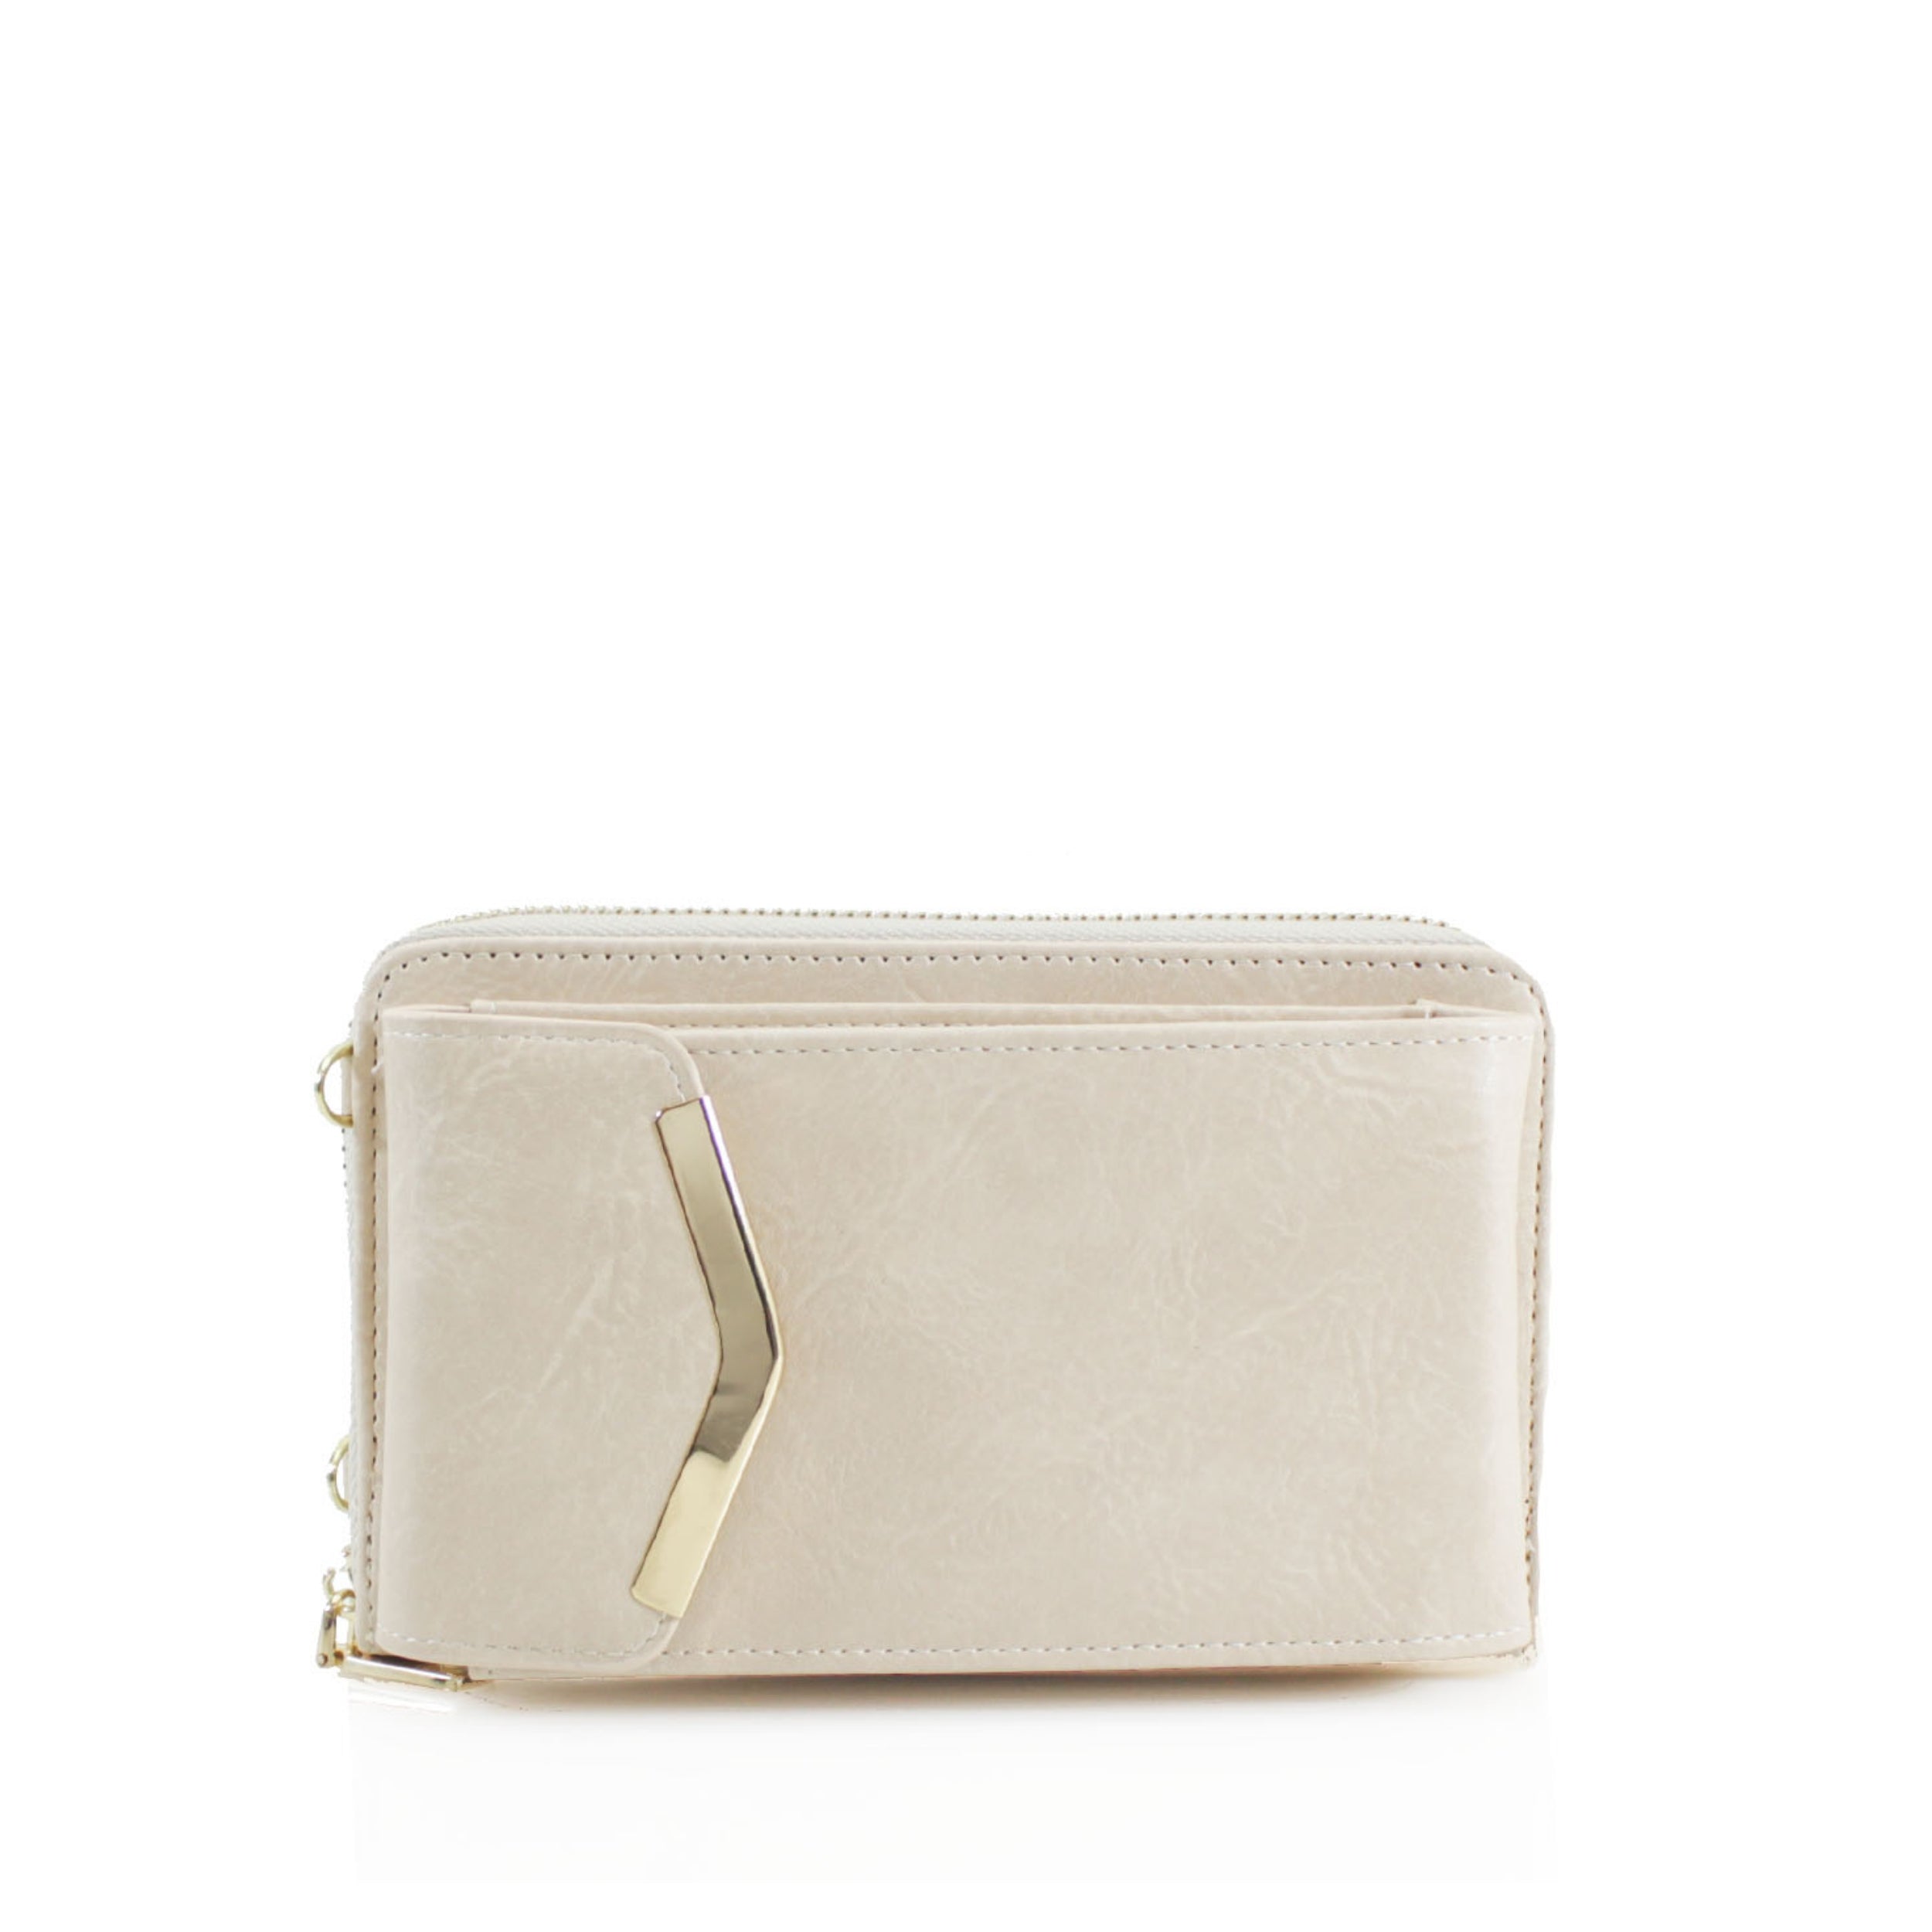 Craze London Crossbody Bags with Card Slots